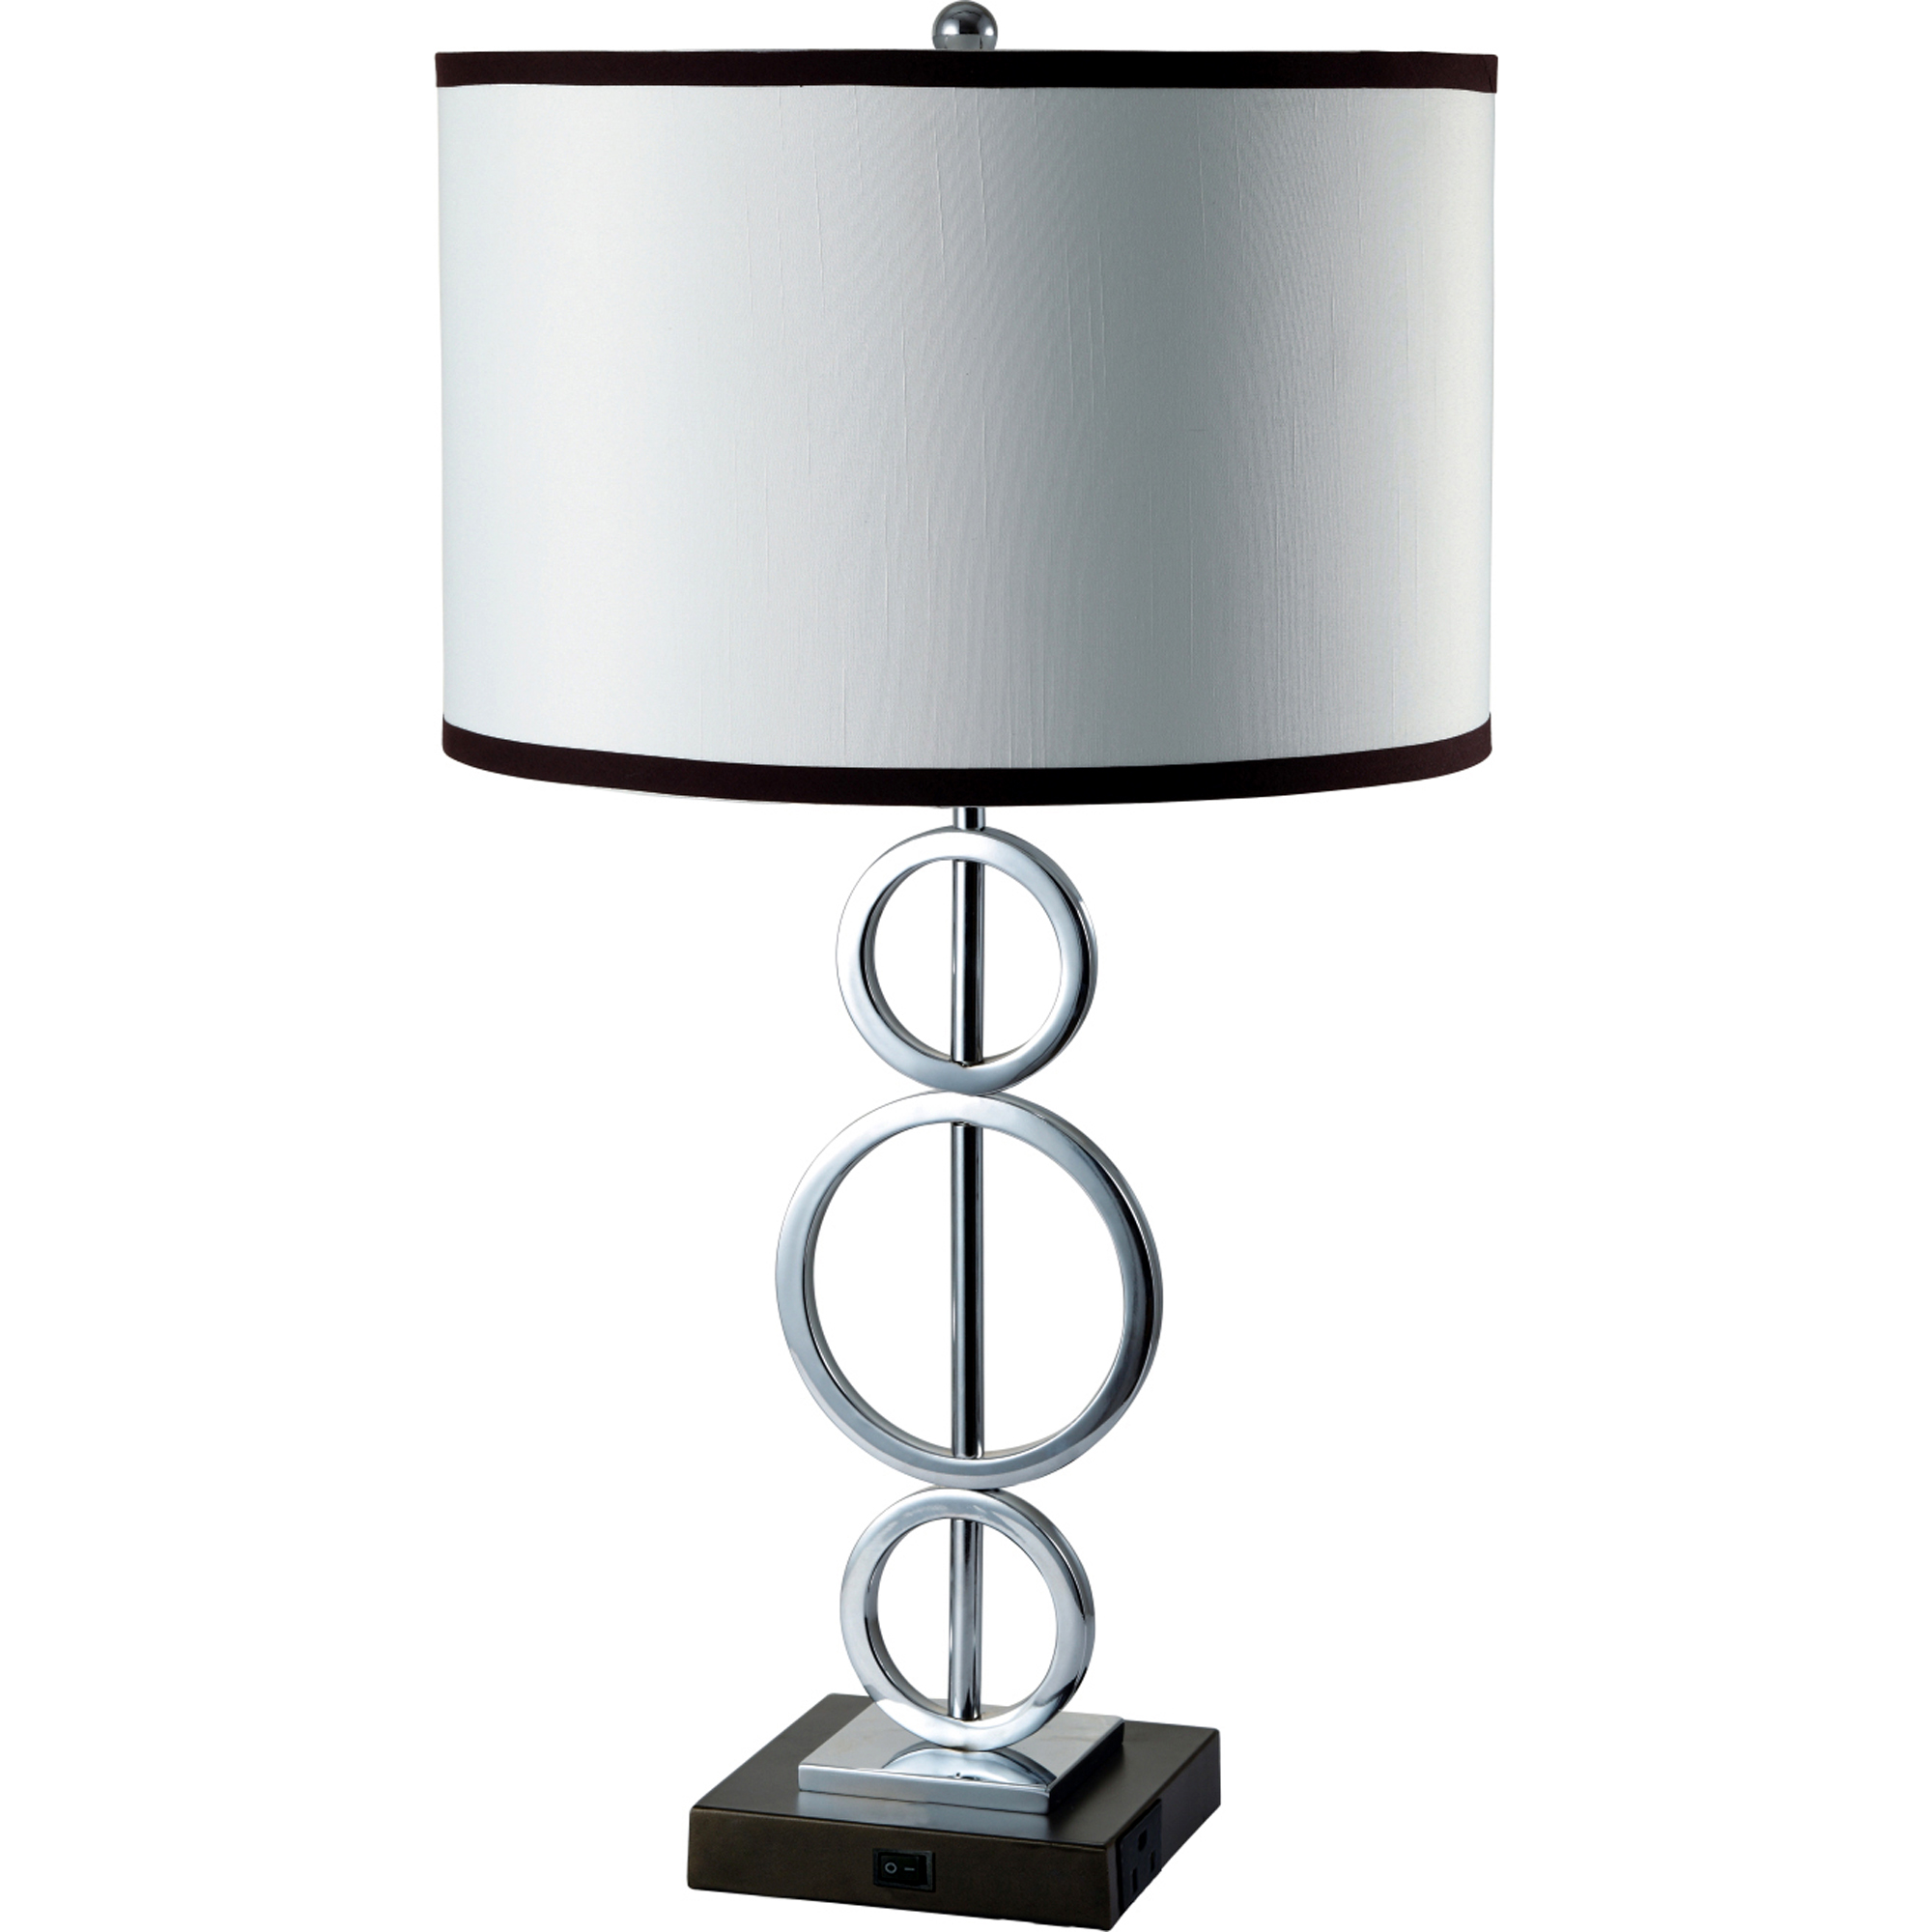 Ore International White Three Ring Metal Table Lamp With Convenient Outlet